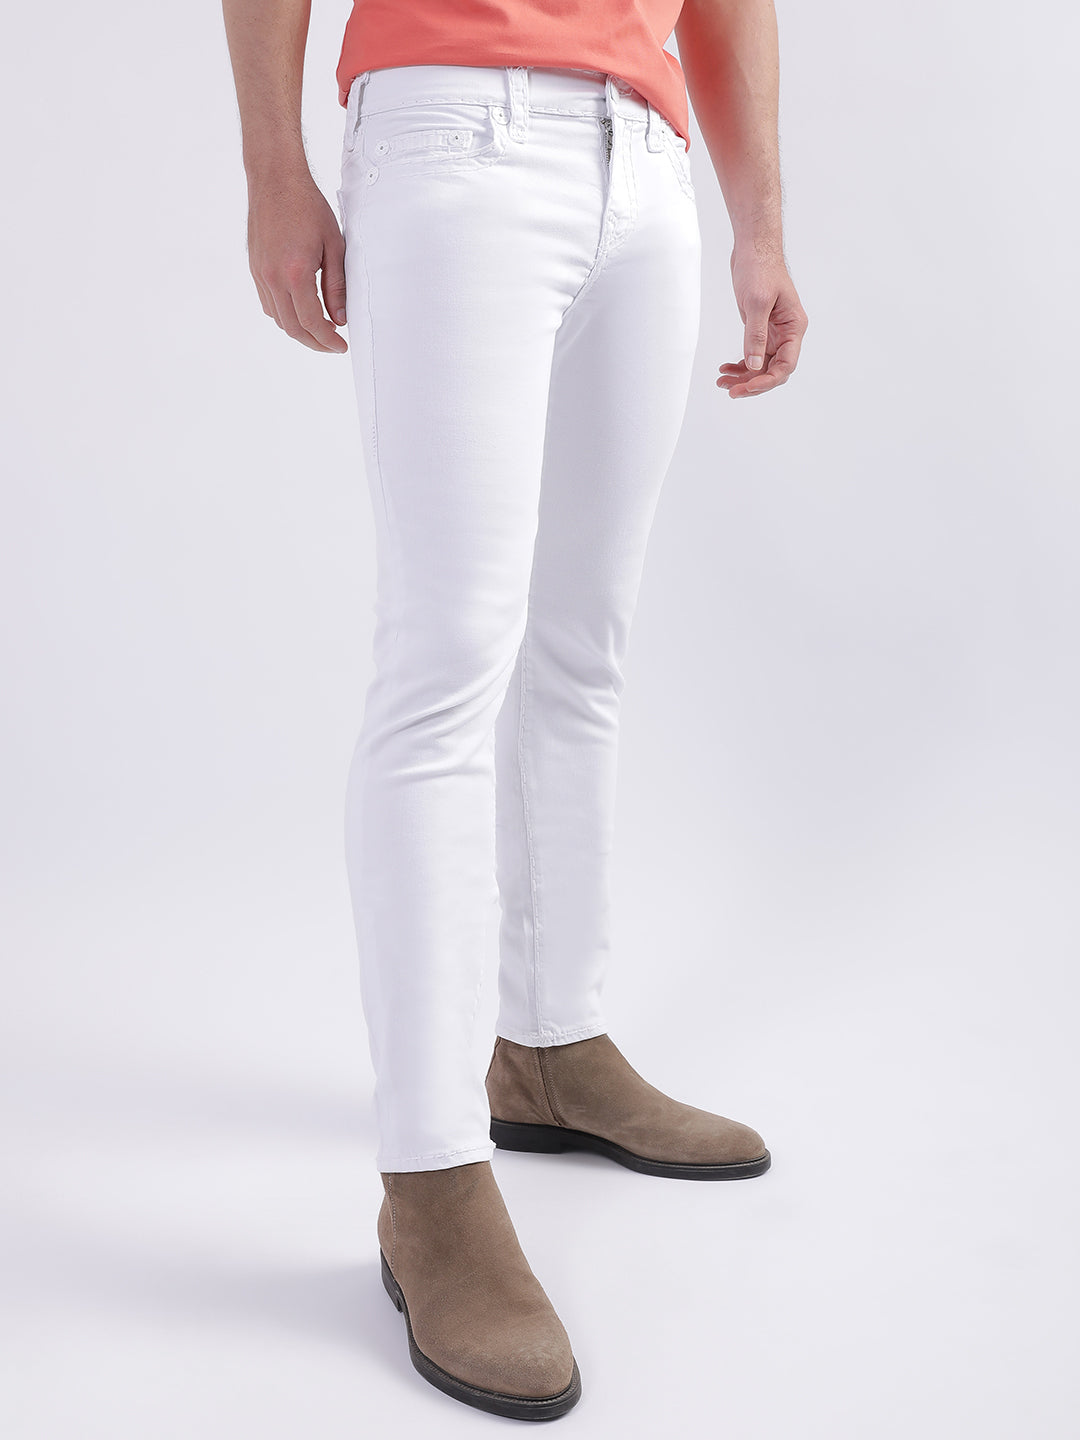 I ordered 15 pairs of white jeans and found the BEST white jeans!